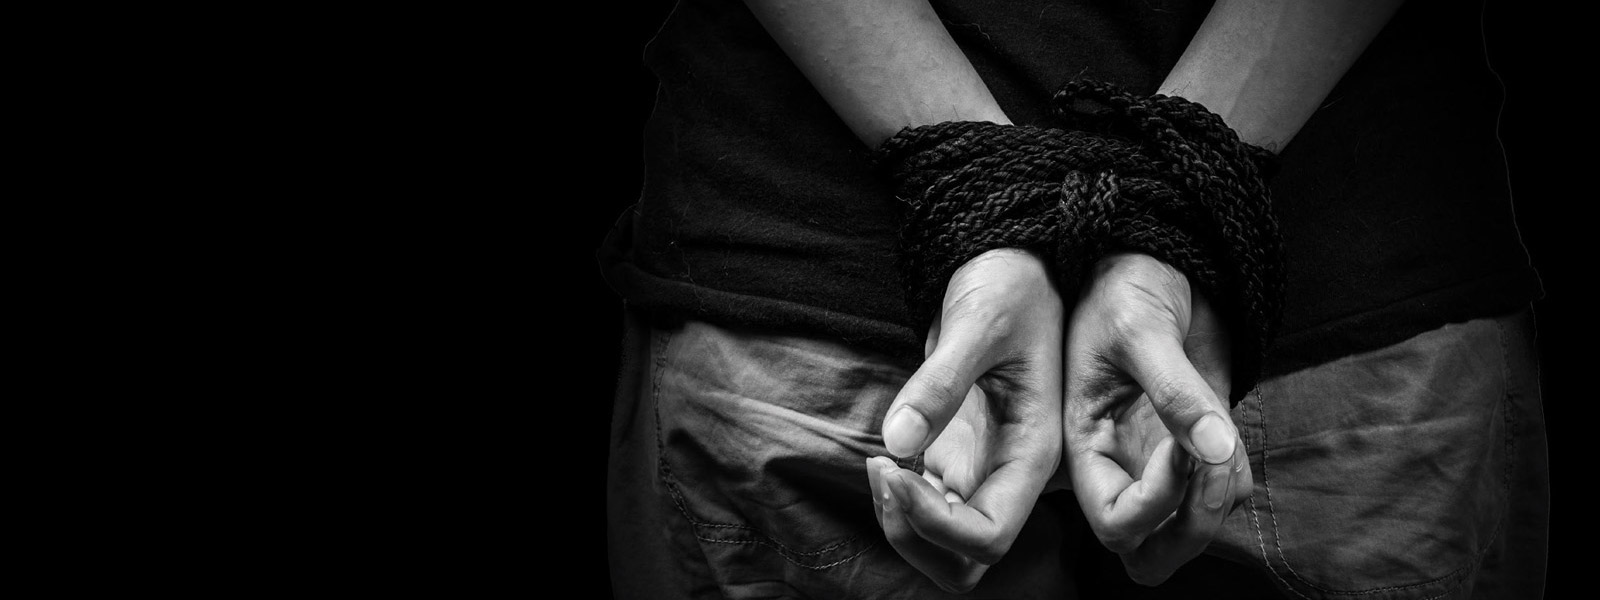 close-up of hands tied behind person's back